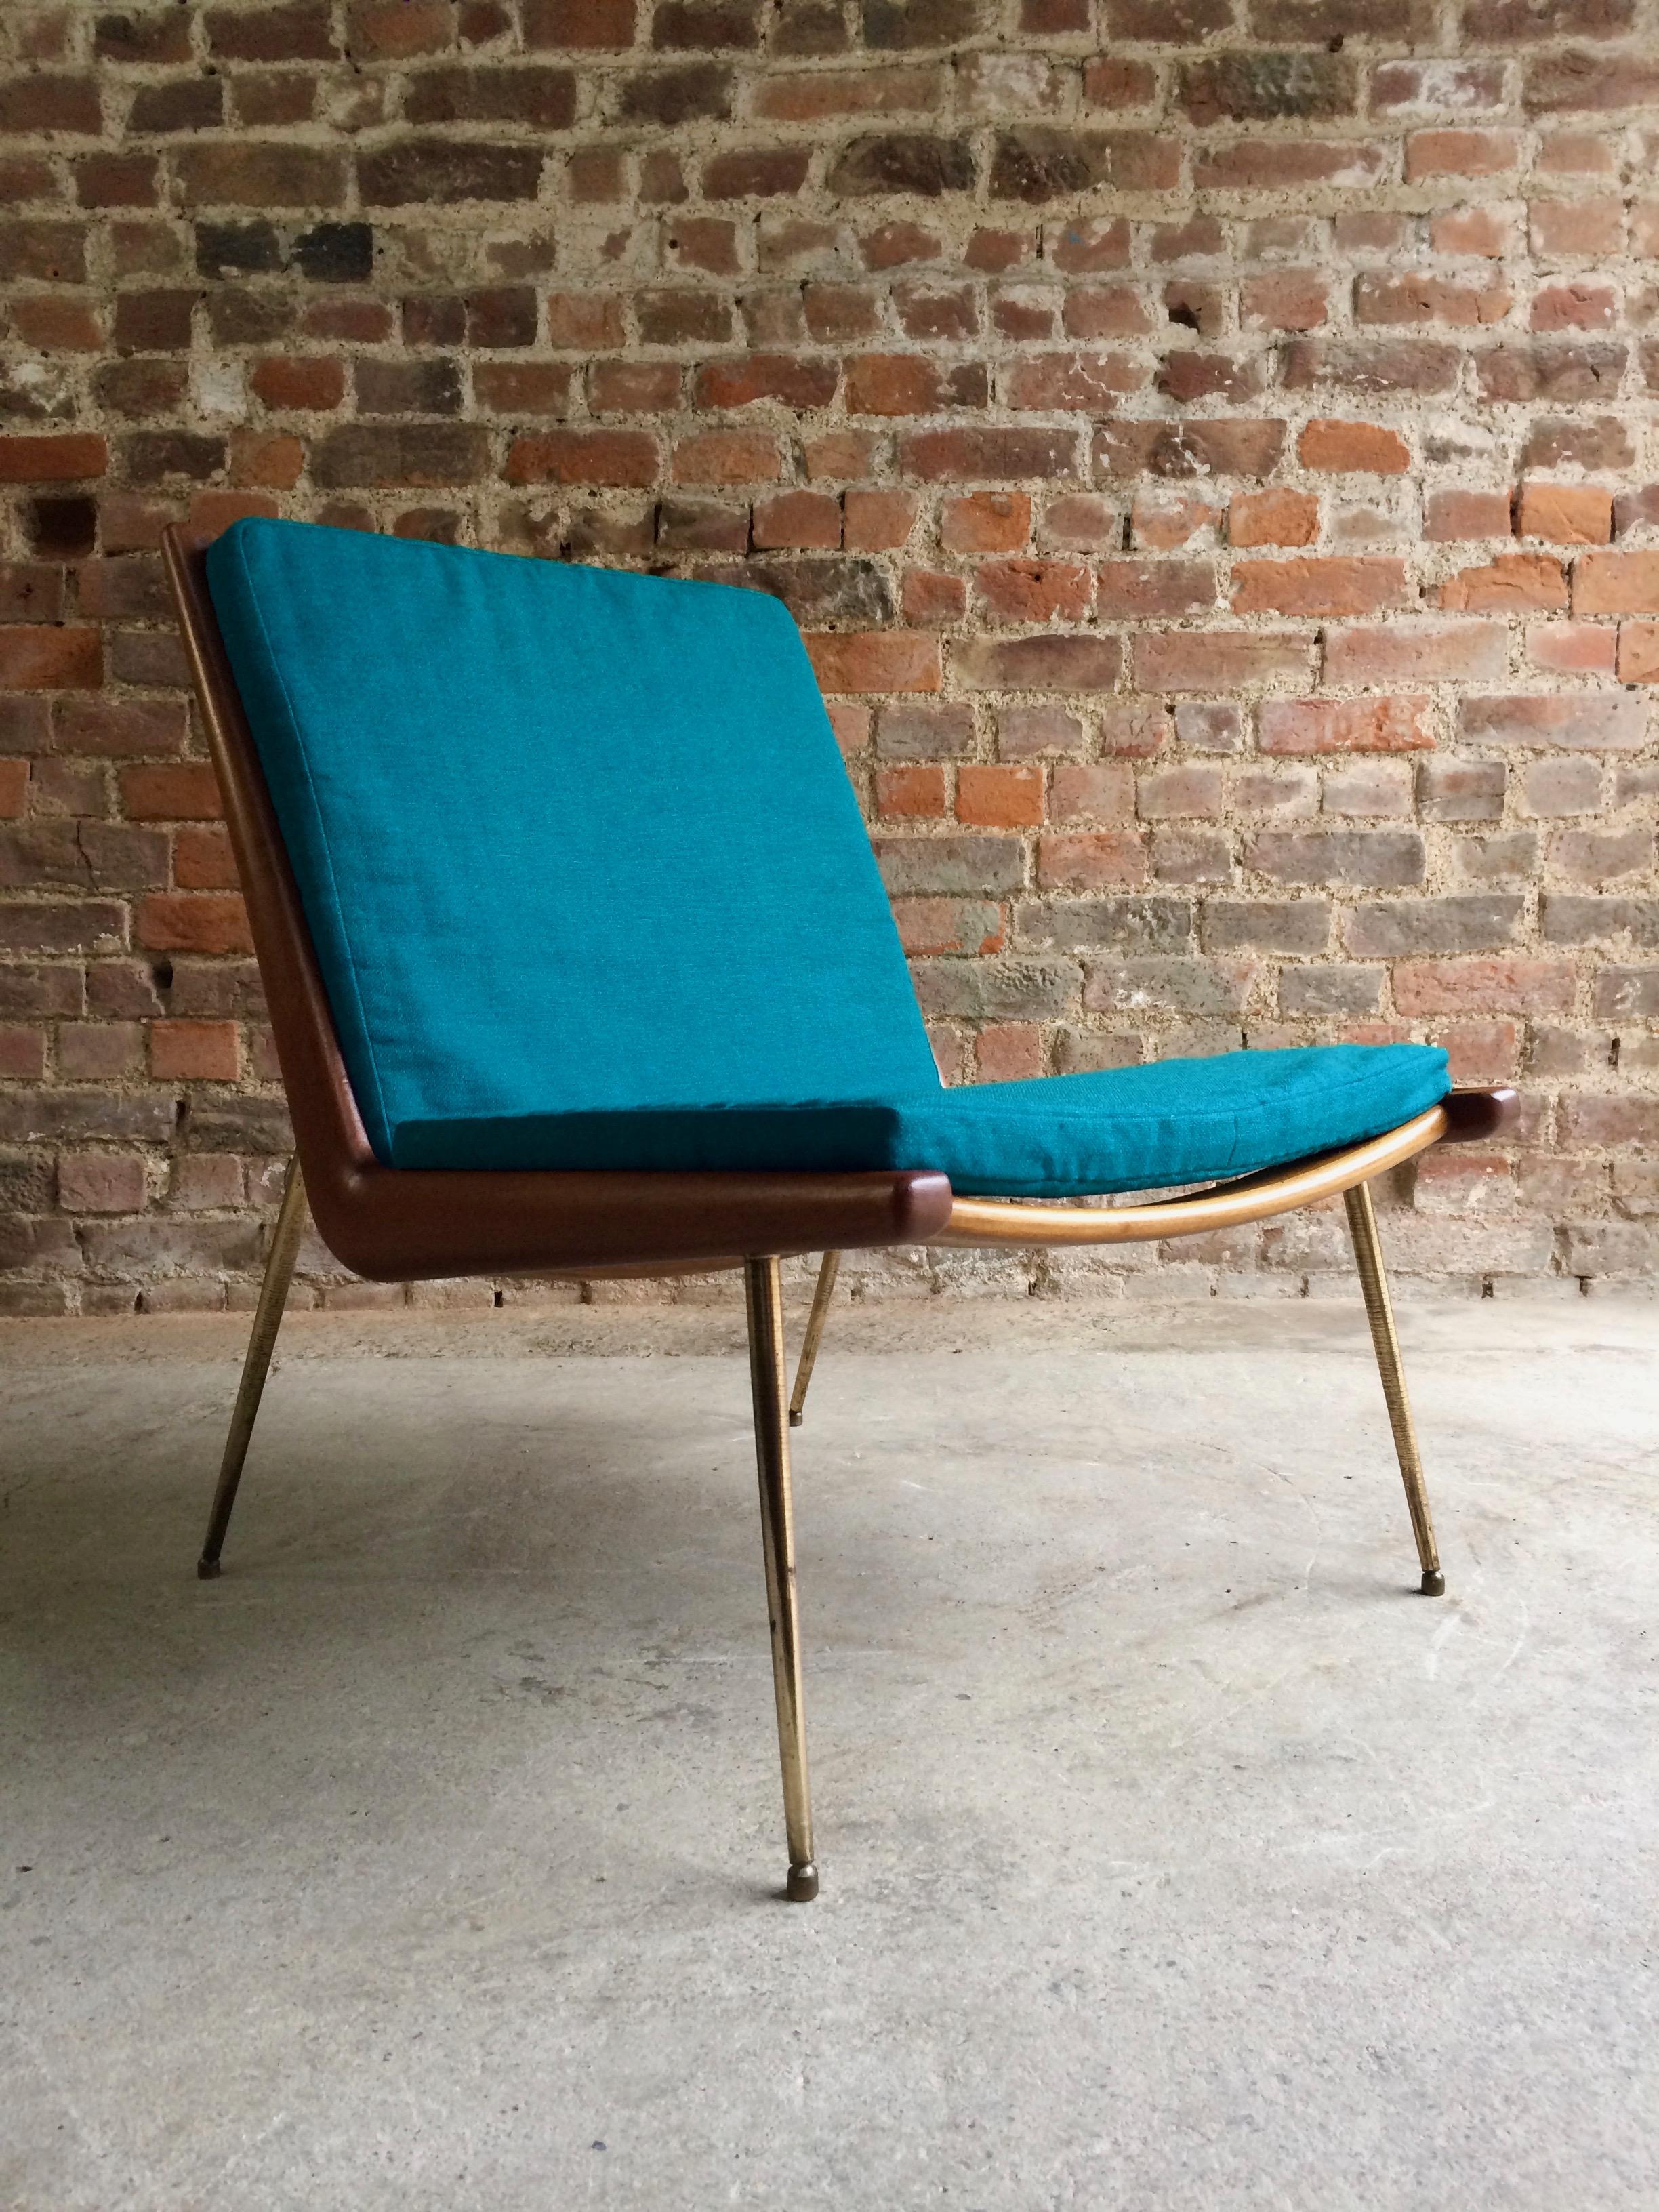 Peter Hvidt & Orla Molgaard Nielsen Boomerang chair manufactured by France & Son 1950s

Fabulous Boomerang chair by Peter Hvidt and Orla Molgaard Nielsen manufactured by France & Son, Denmark, the teak frame sit on brass plated legs with sabots,